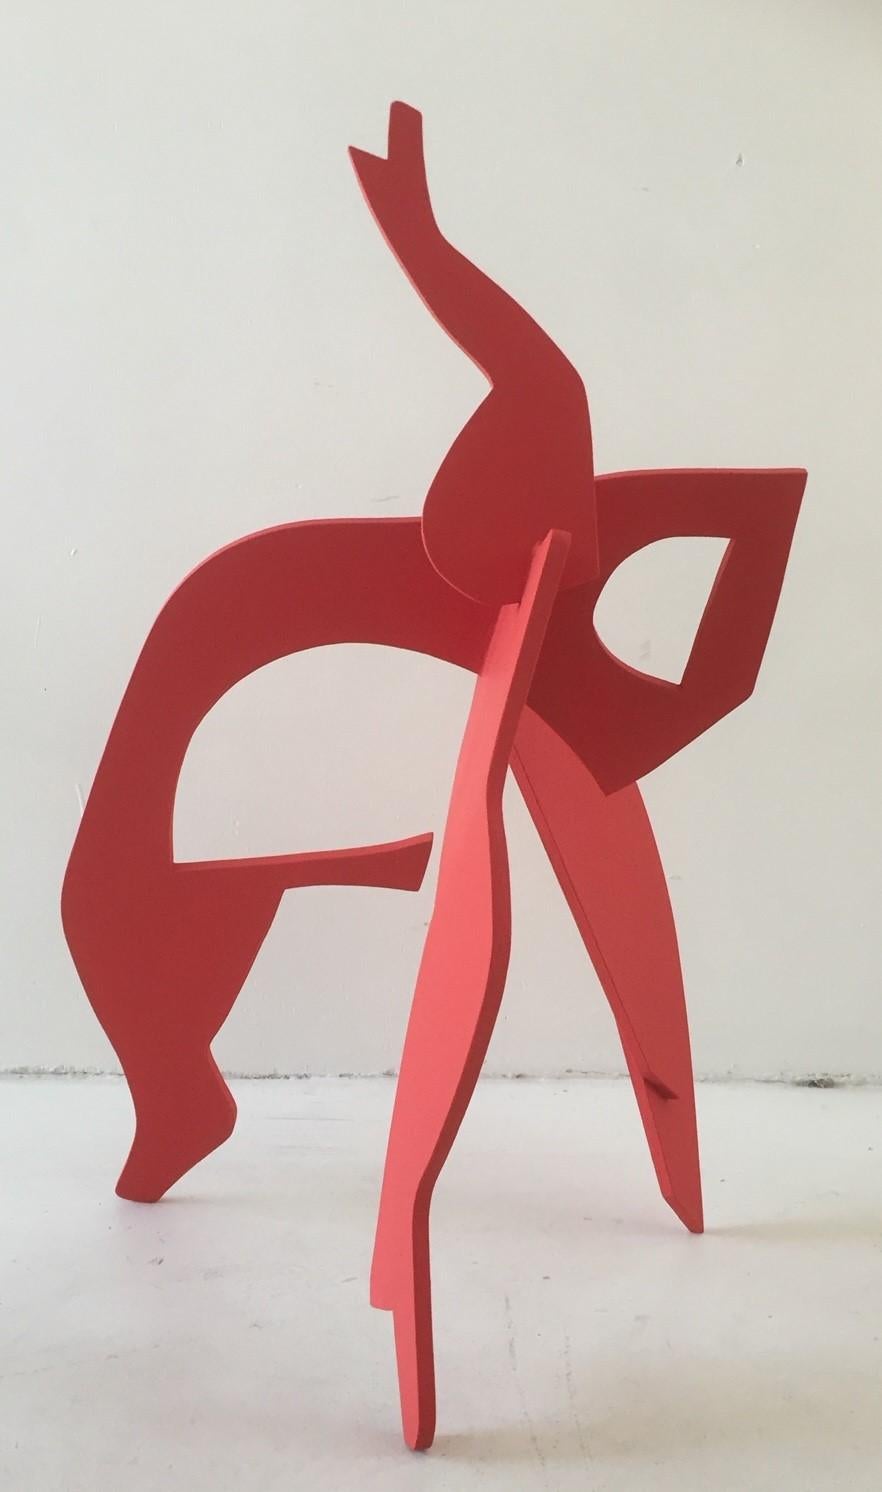 This sculpture is made of aluminium, painted in a thick rough layer of red laquer. 

Jan Wils is an artist born in the city of Eindhoven, in The Netherlands. 
Jan Wils about his sculptures:

“The objects I make are interactive and dynamic. Cheerful,